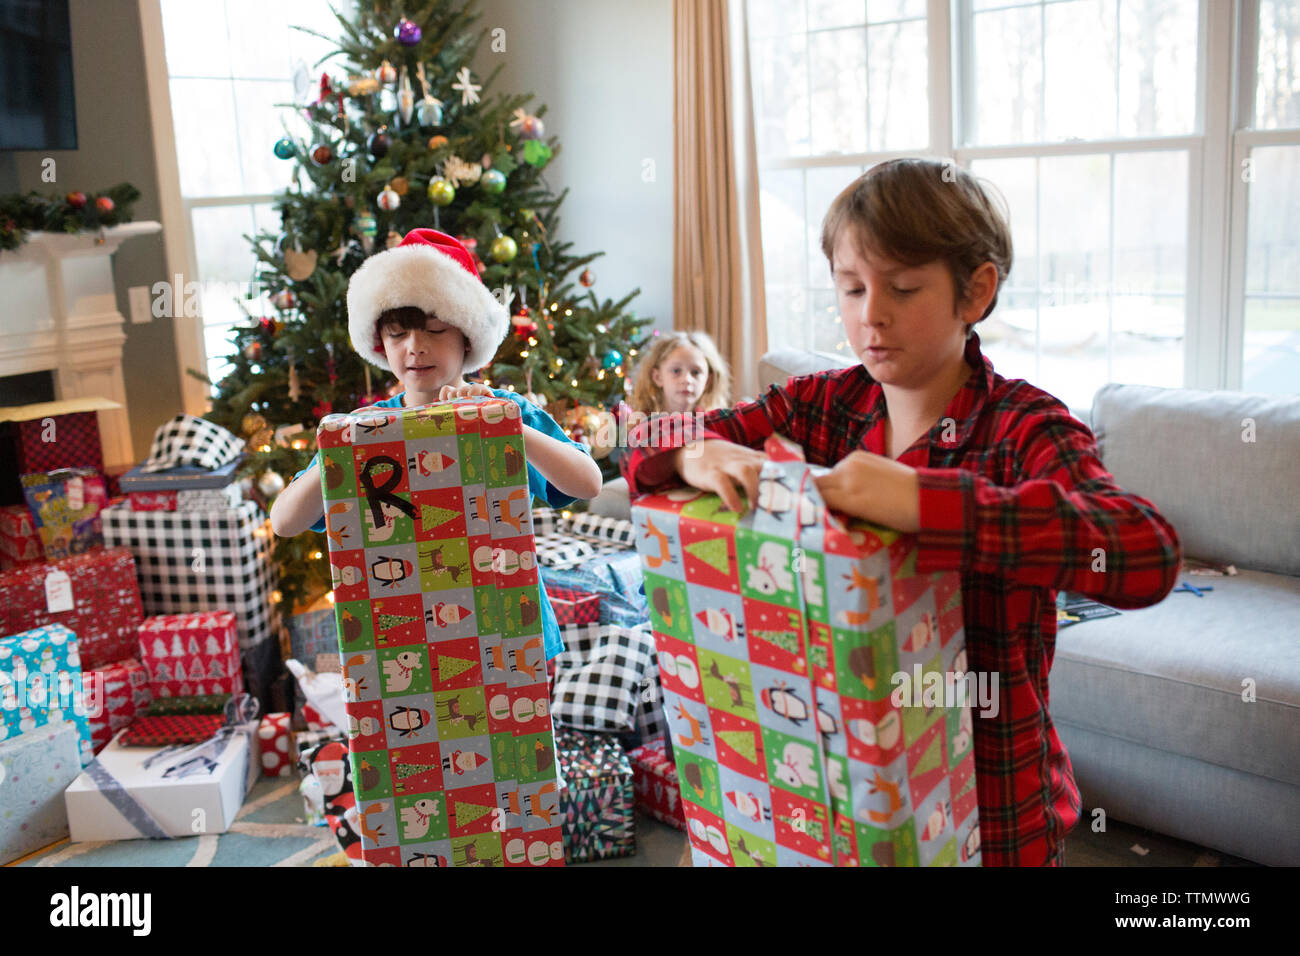 Cousins Opening Colorful Christmas Gifts While Little Sister Watches Stock Photo